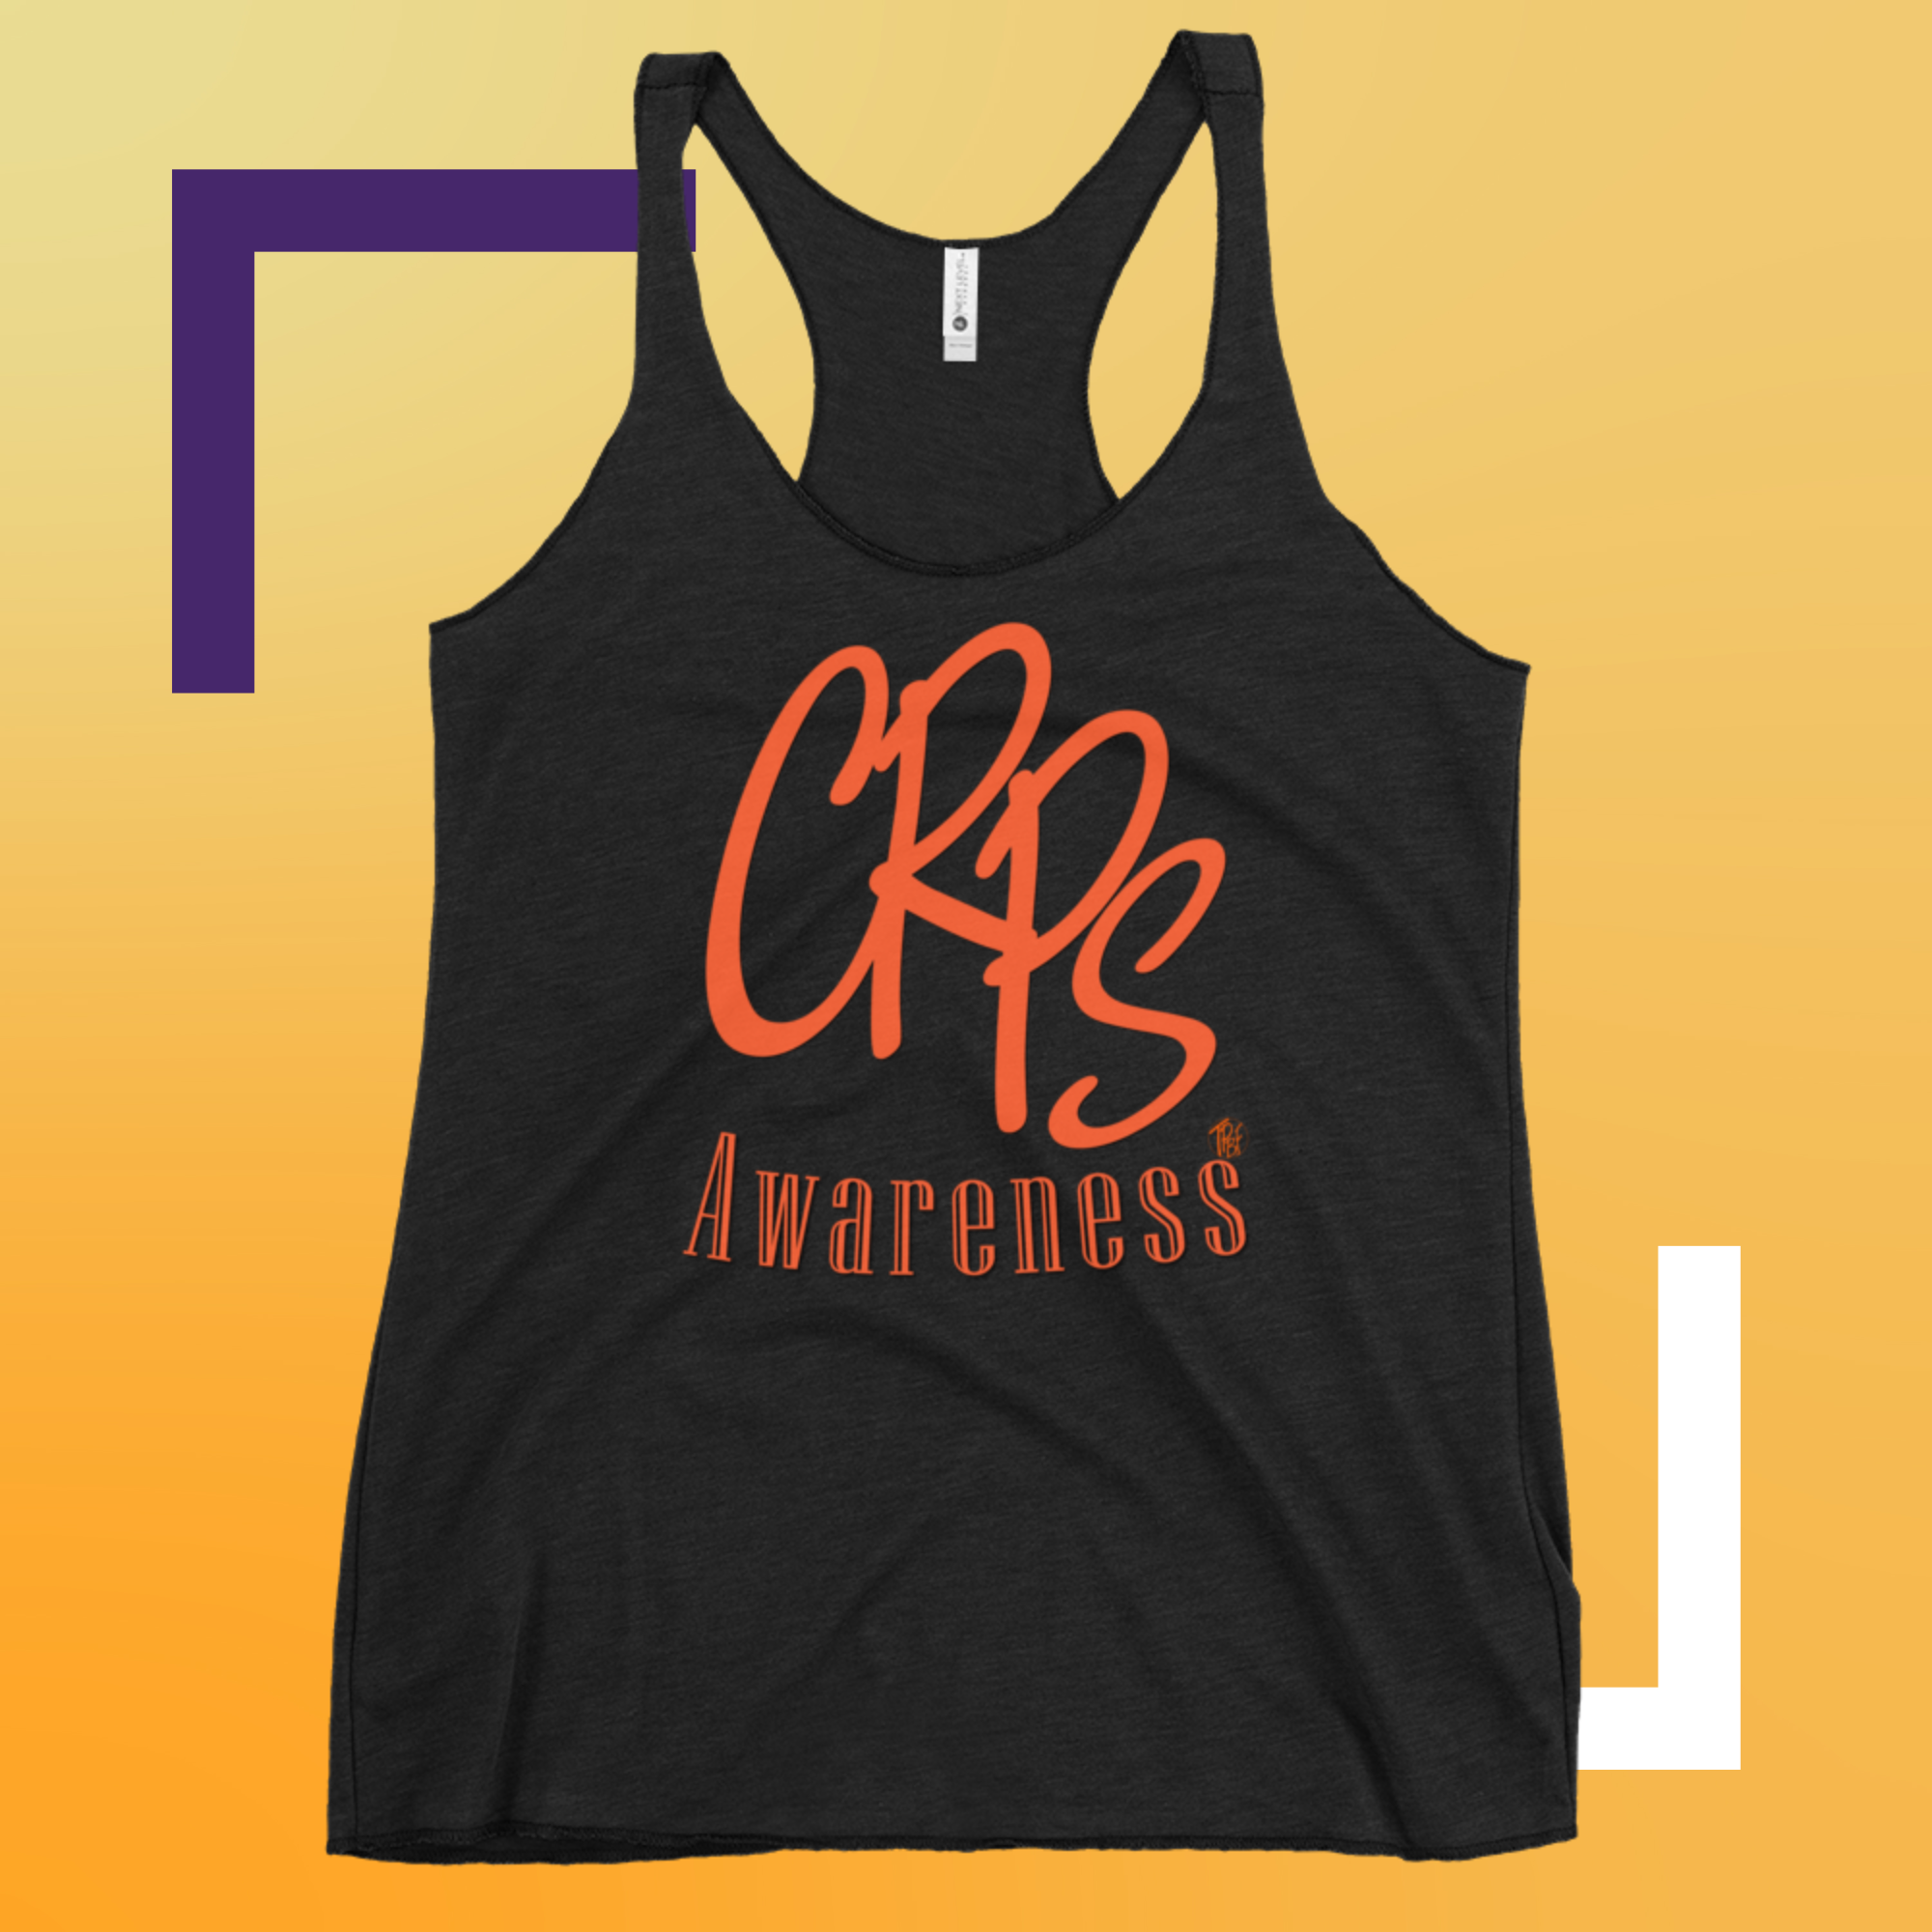 Quality black women's racer back singlet top with CRPS Awareness in orange printed on the front.